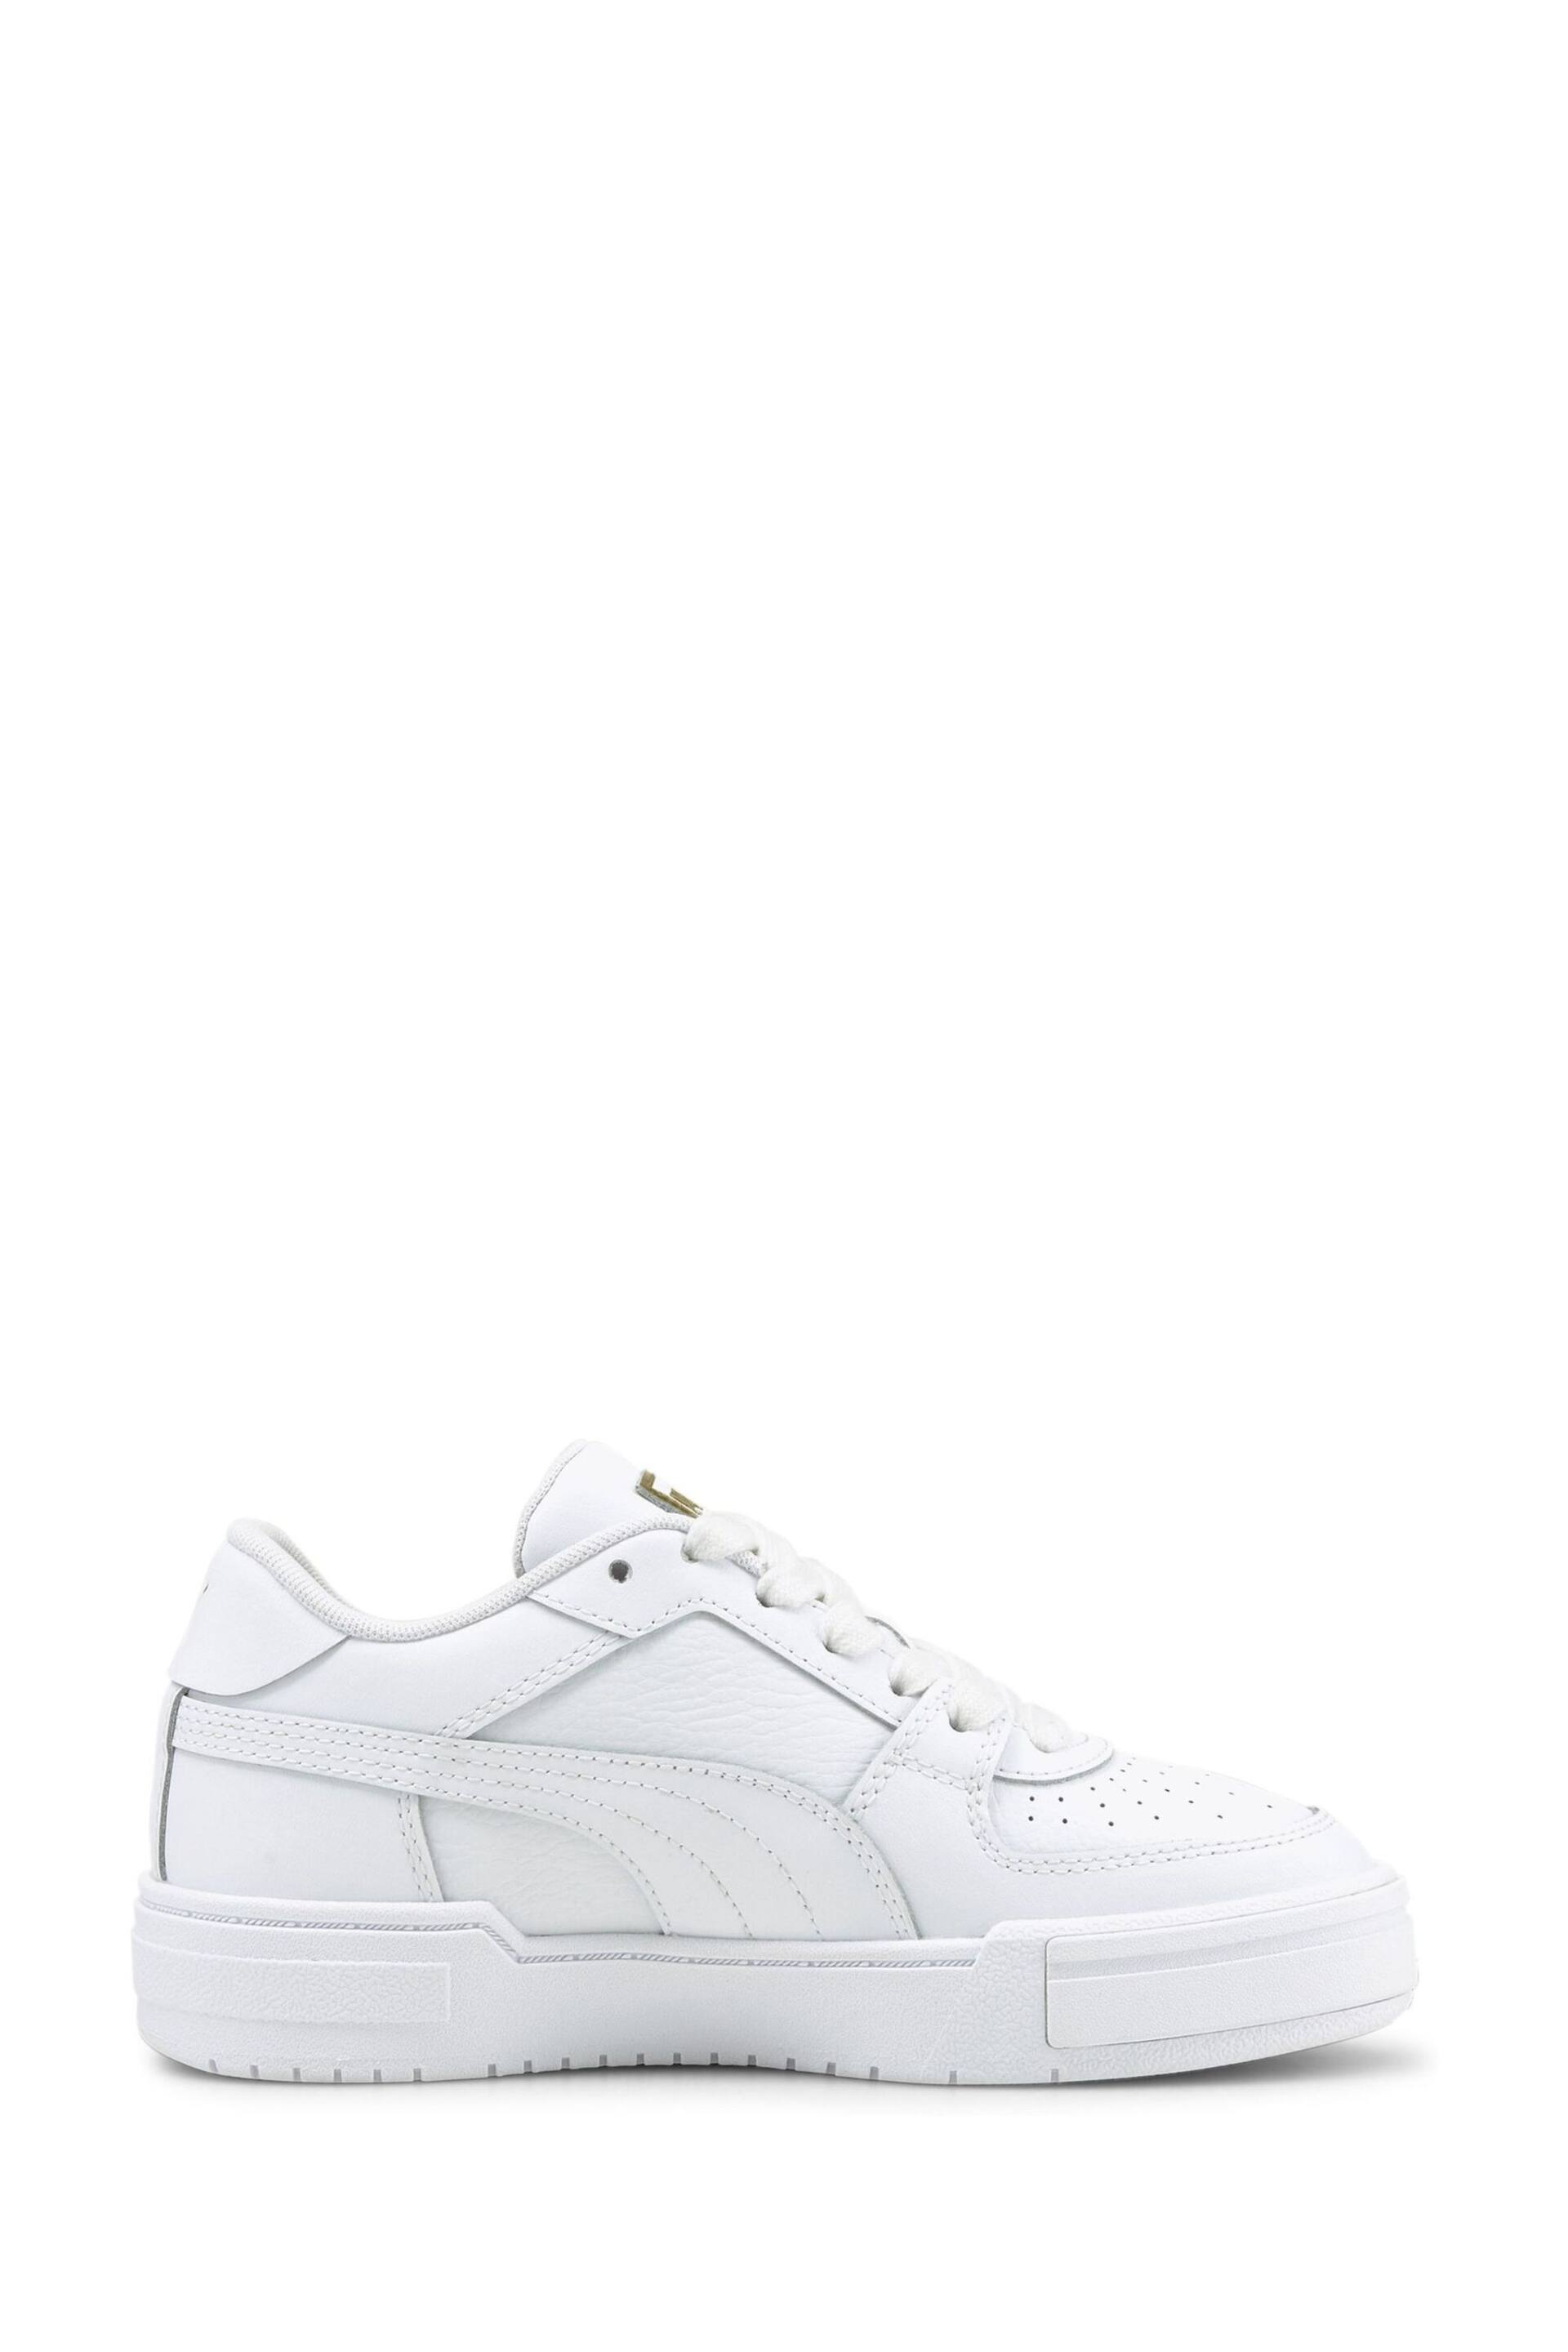 Puma White CA Pro Classic Youth Trainers - Image 1 of 6